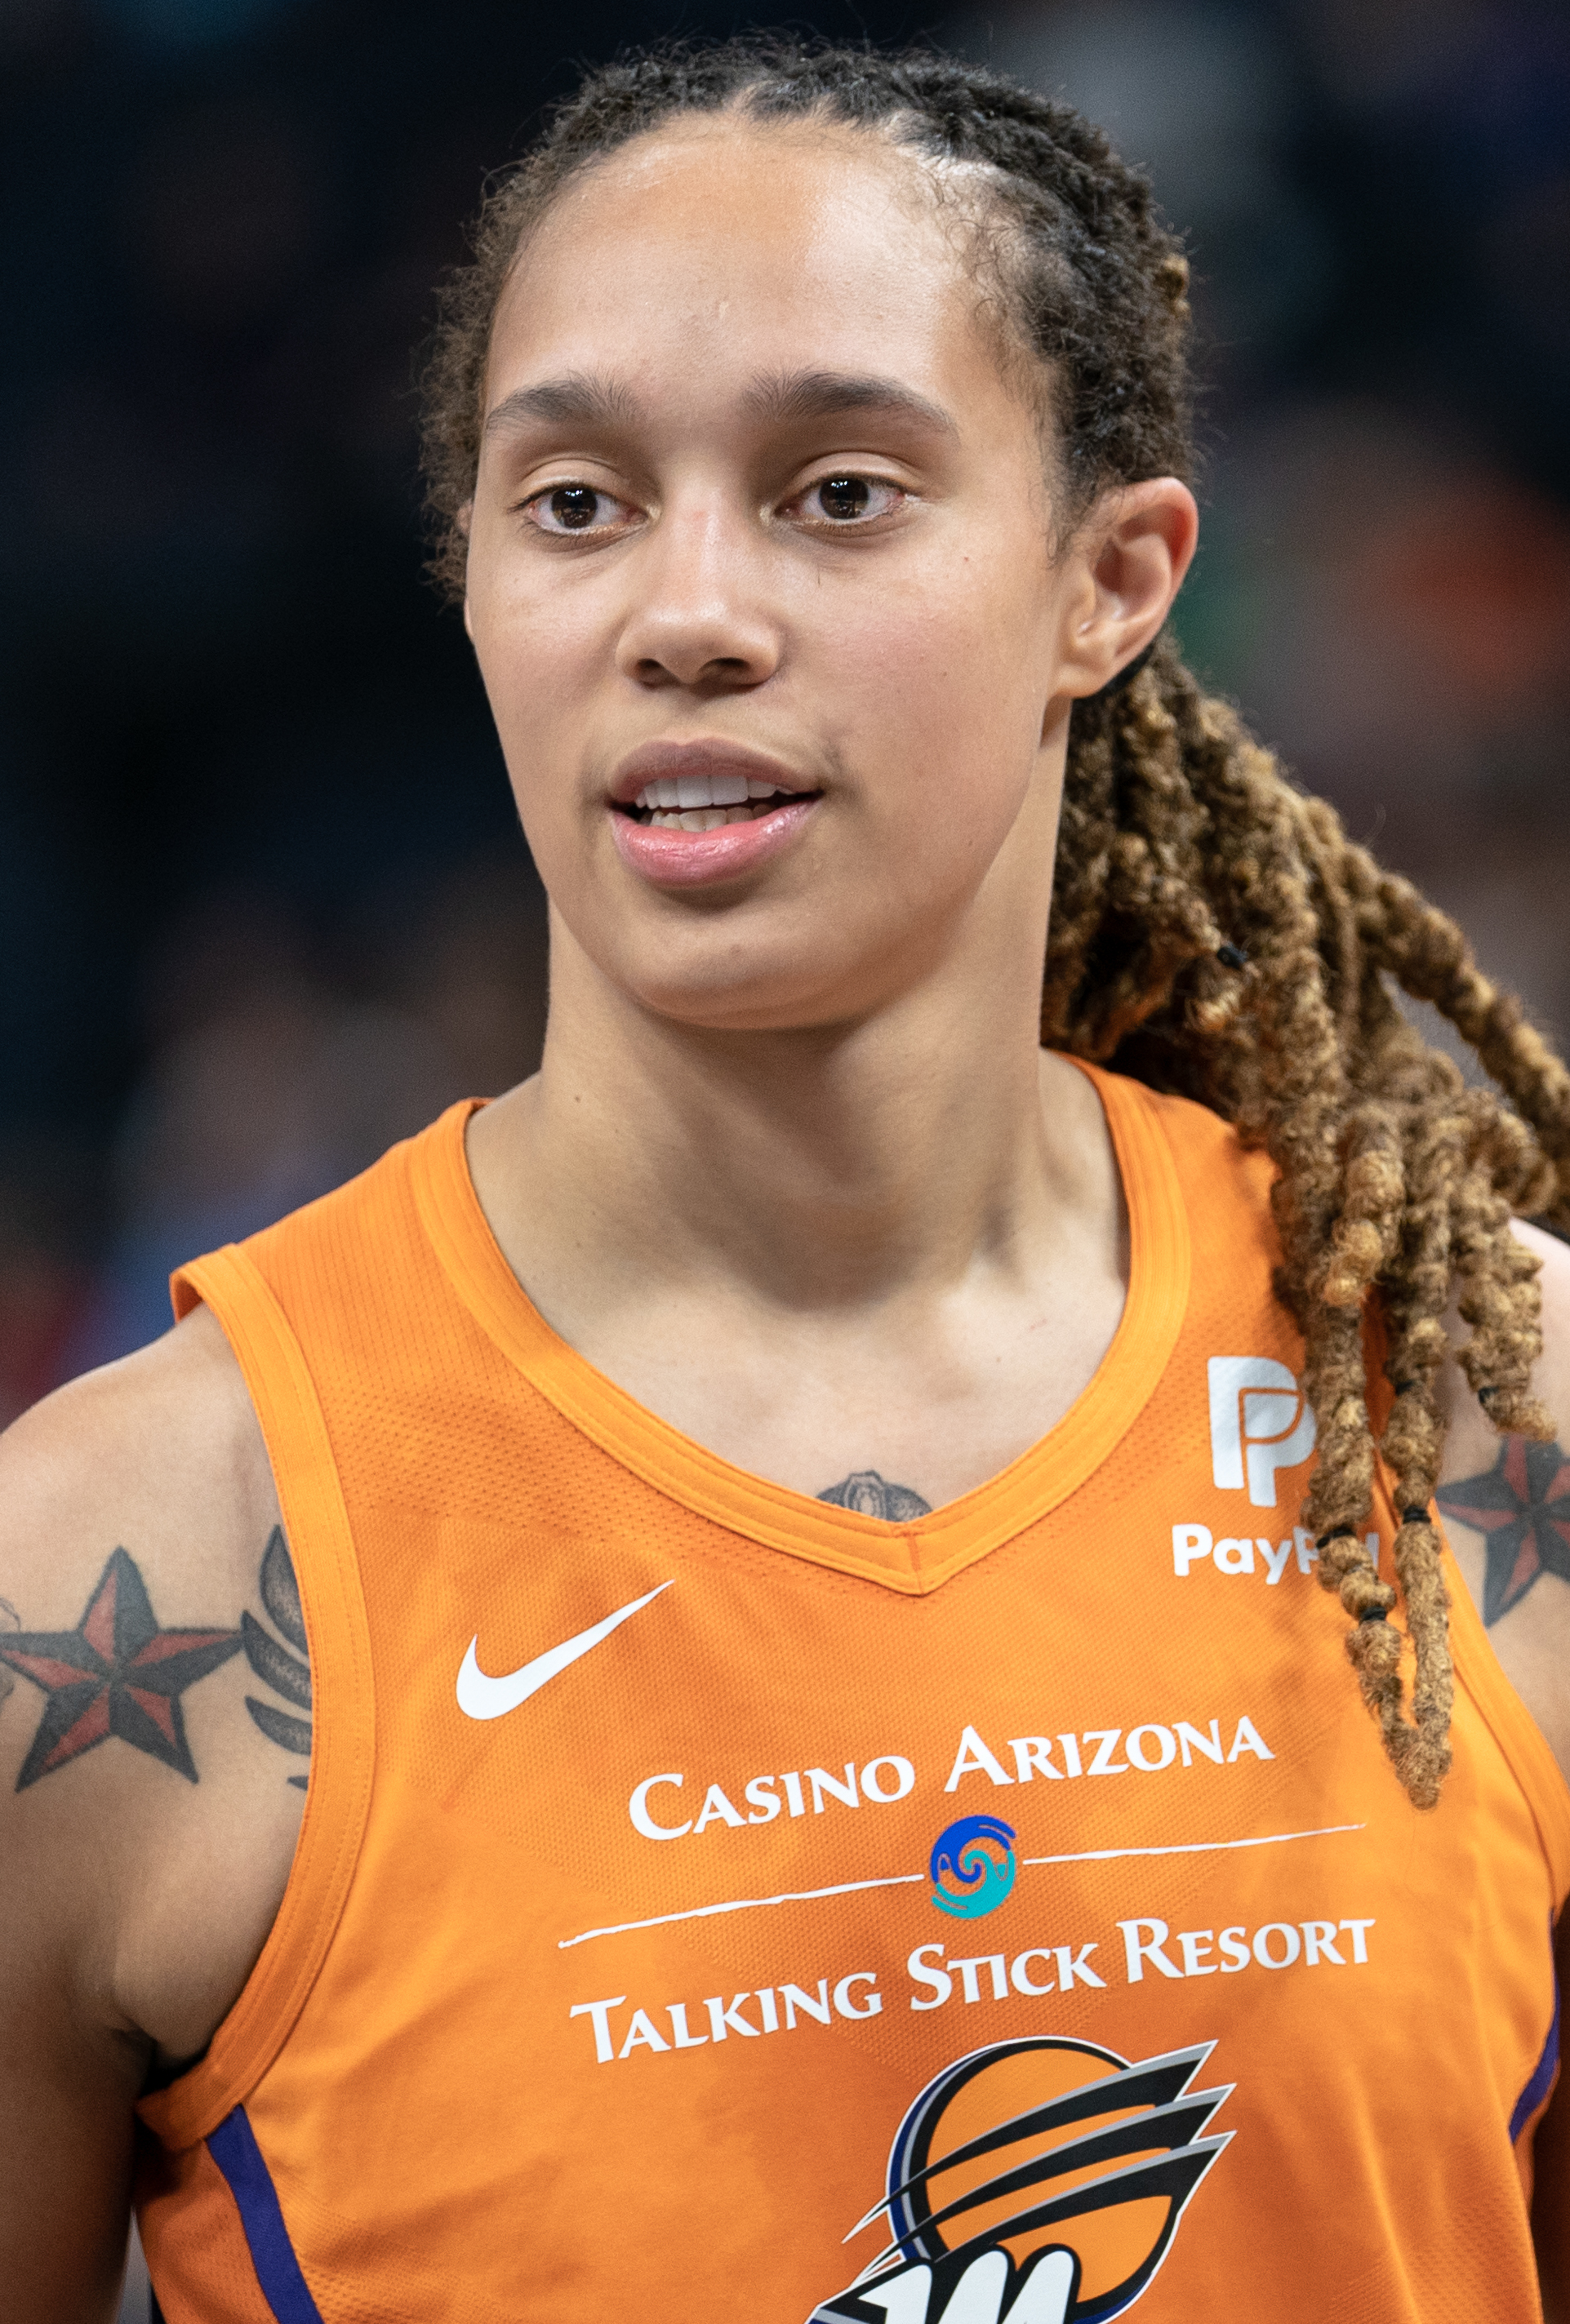 Griner lands in U.S. as Russia's Bout greets family in Moscow